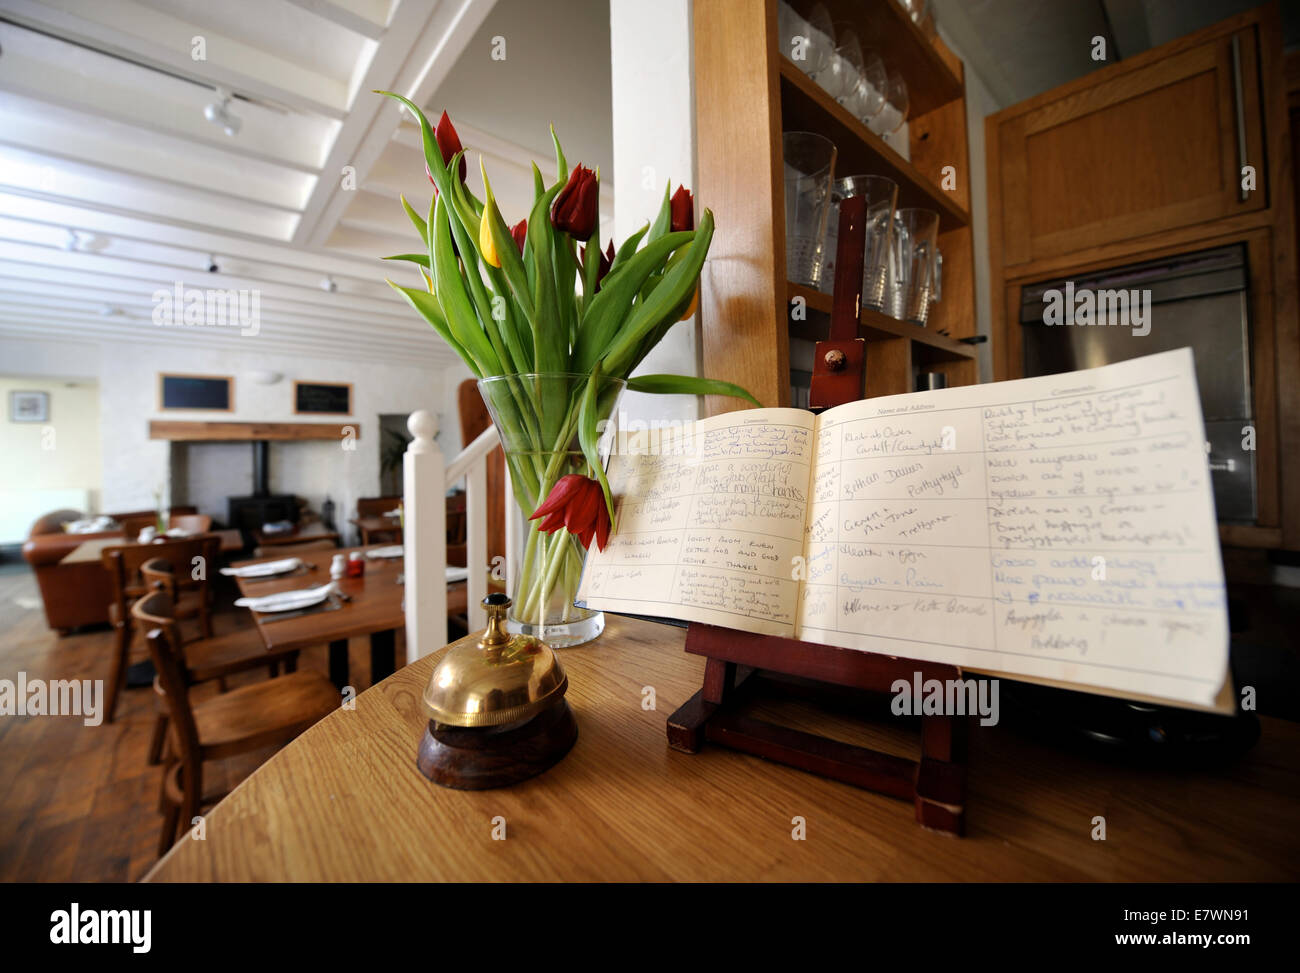 Visitors book in the reception of a bed and breakfast guesthouse UK Stock Photo